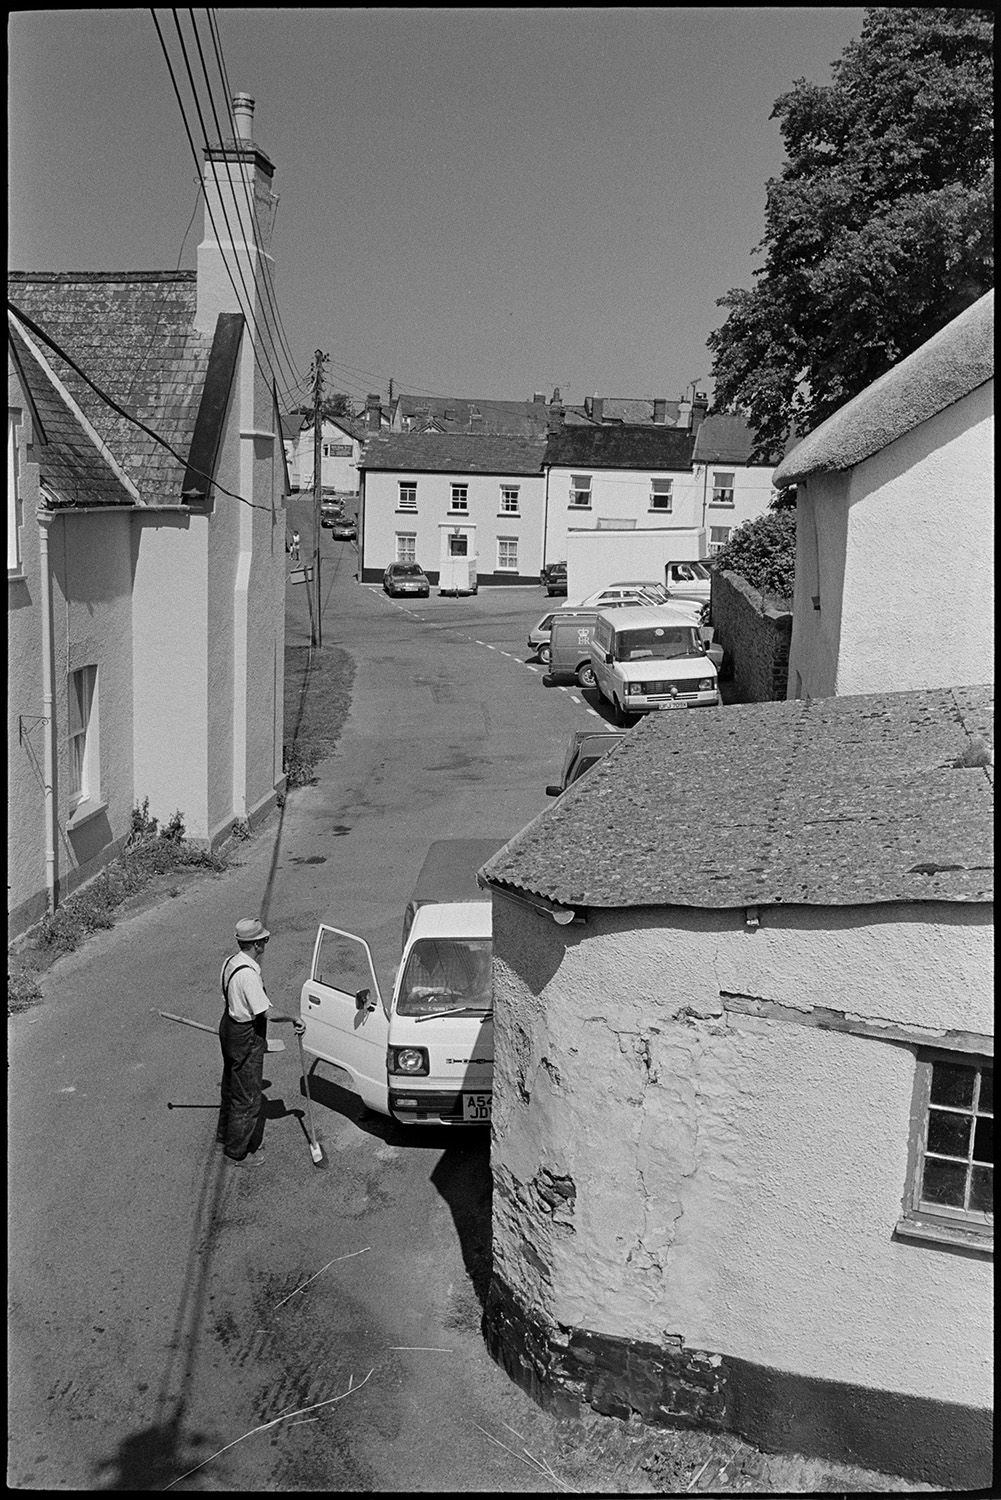 Thatcher working on roof with old building behind, some cob and thatch.
[View of New Street, Chulmleigh, taken from a roof, towards the car parking area in front of the Church of St. Mary Magdalene, Chulmleigh. A man is stood holding a brush and a spade by a parked van in the foreground.]